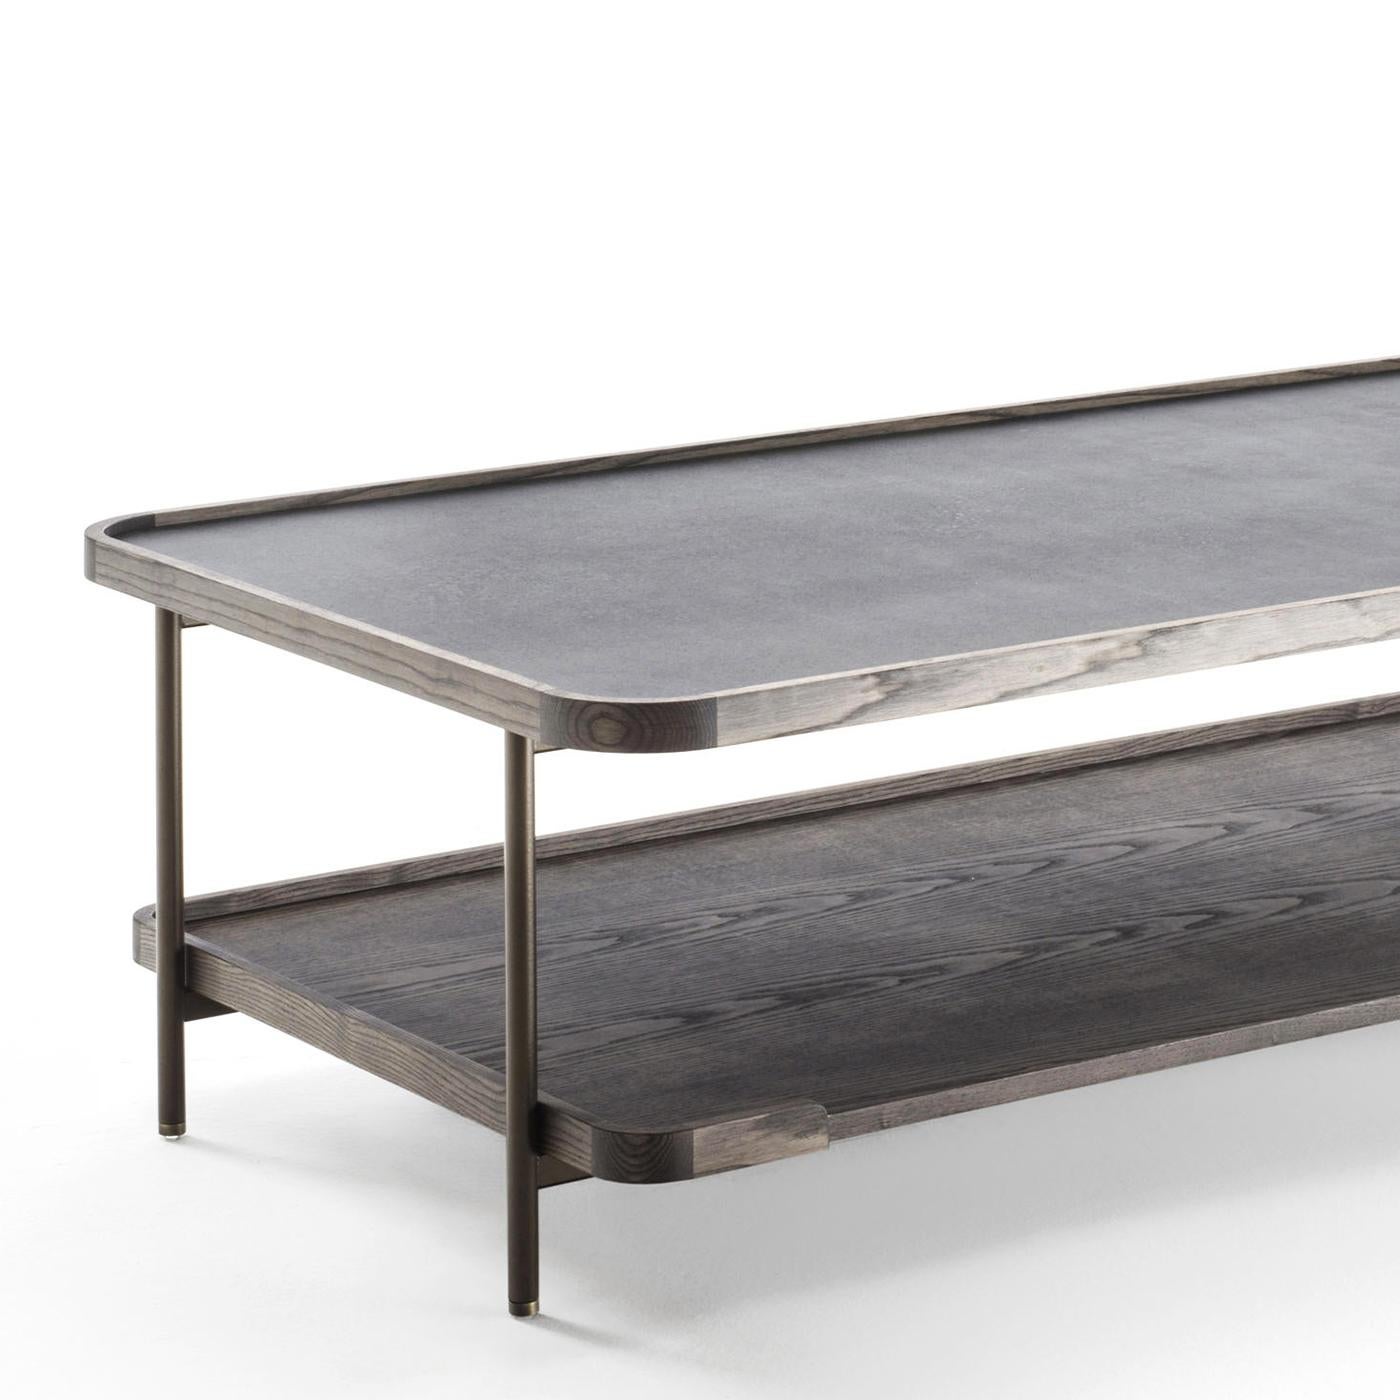 Coffee table Kart rectangular with metal structure
in bronzage finish. With down top in solid ash wood
and upper top in rock. End of the feet are in brushed
bronzed brass.
 